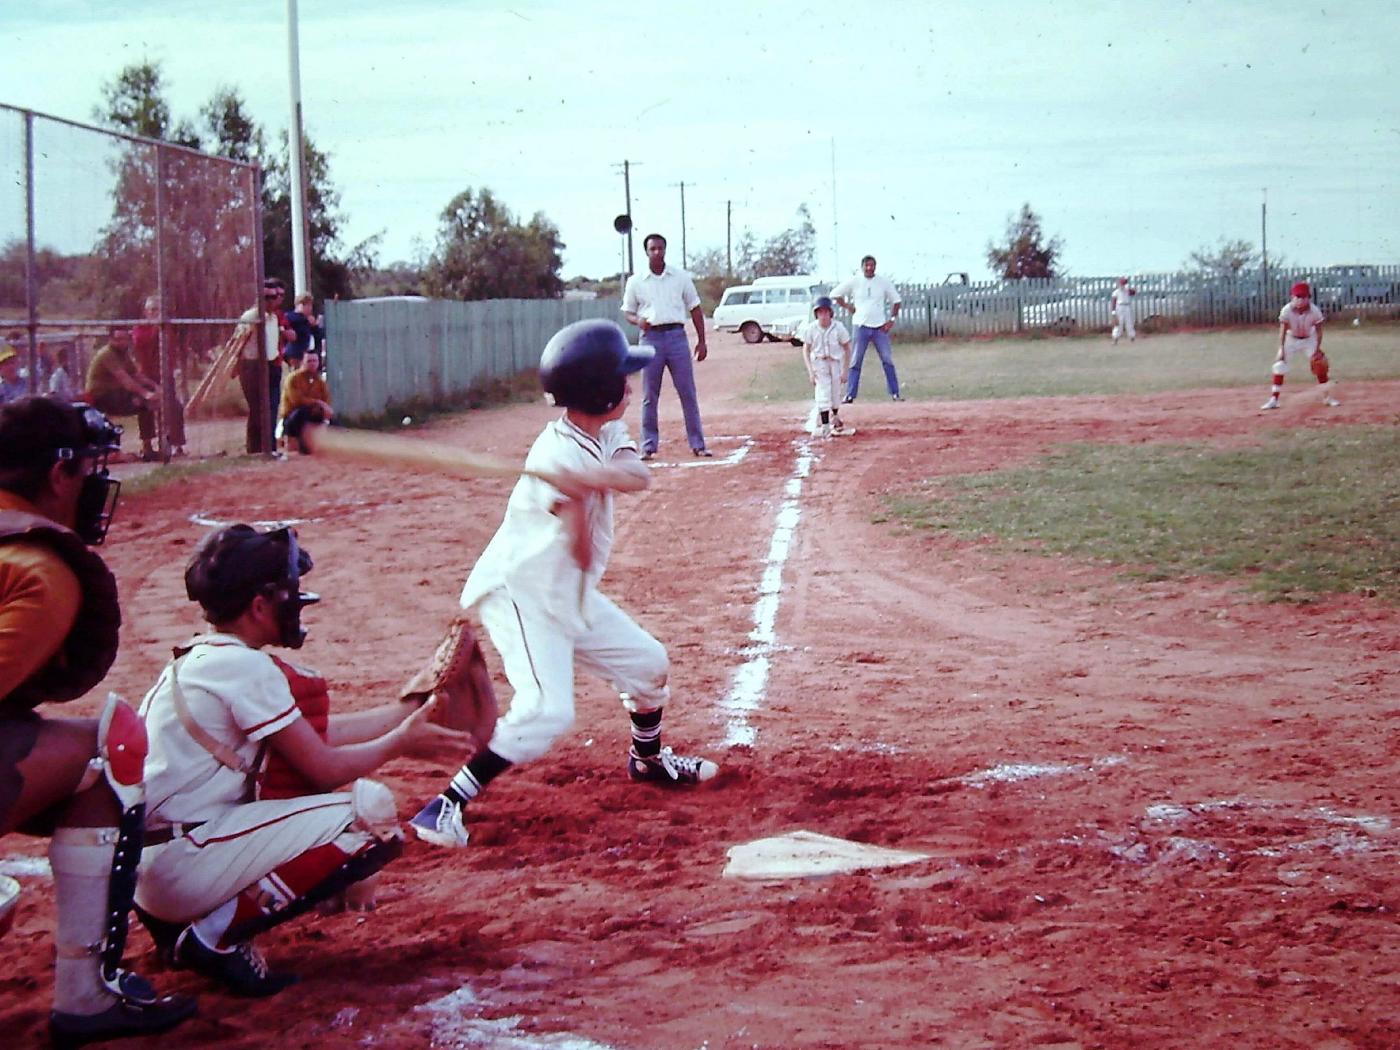 A young boy takes a swing at a baseball on a red dirt baseball park